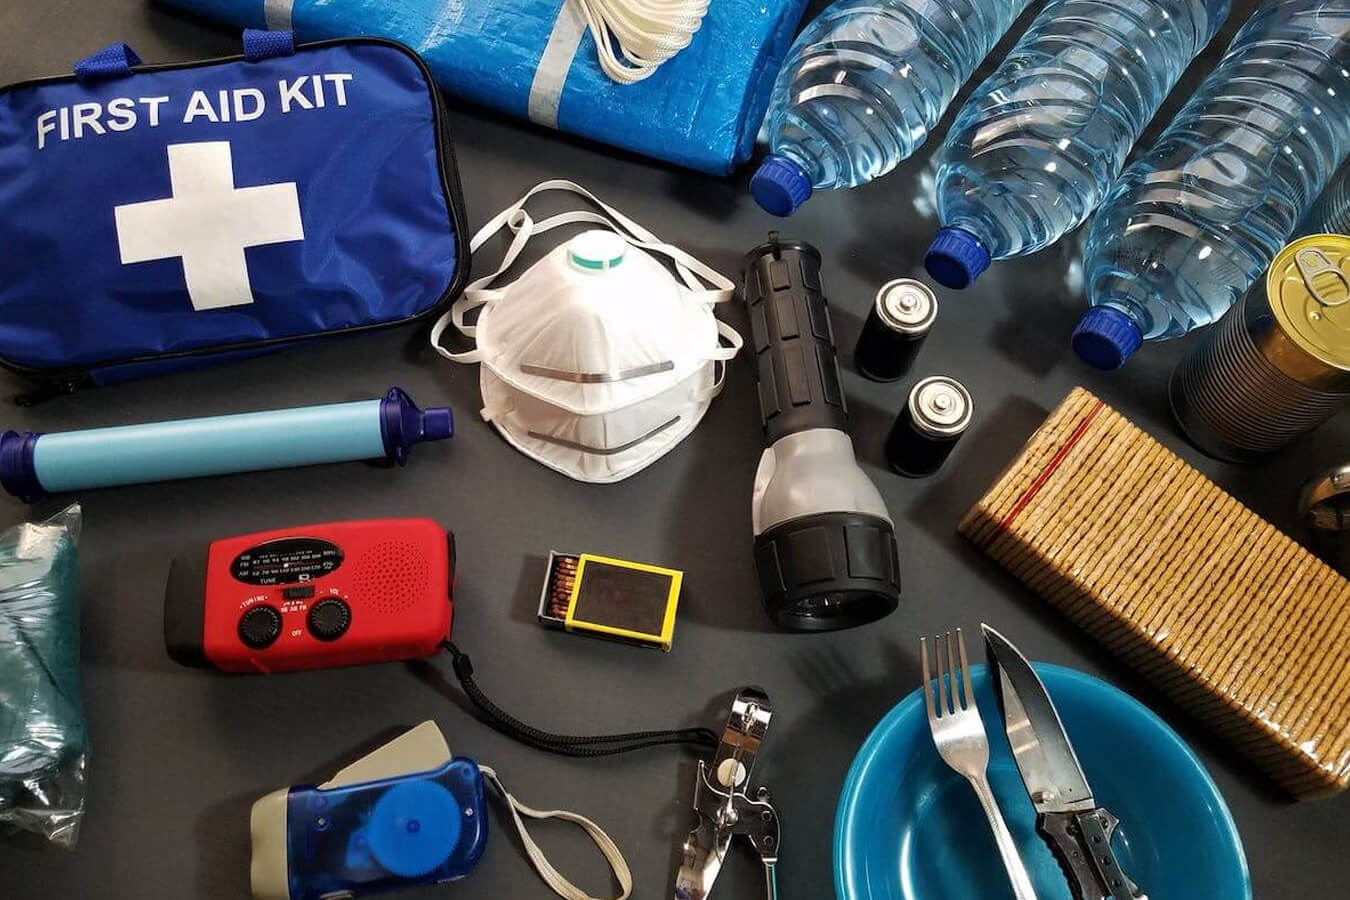 A variety of emergency preparedness supplies, like a first-aid kit, cans of food, matches, flashlights, etc.